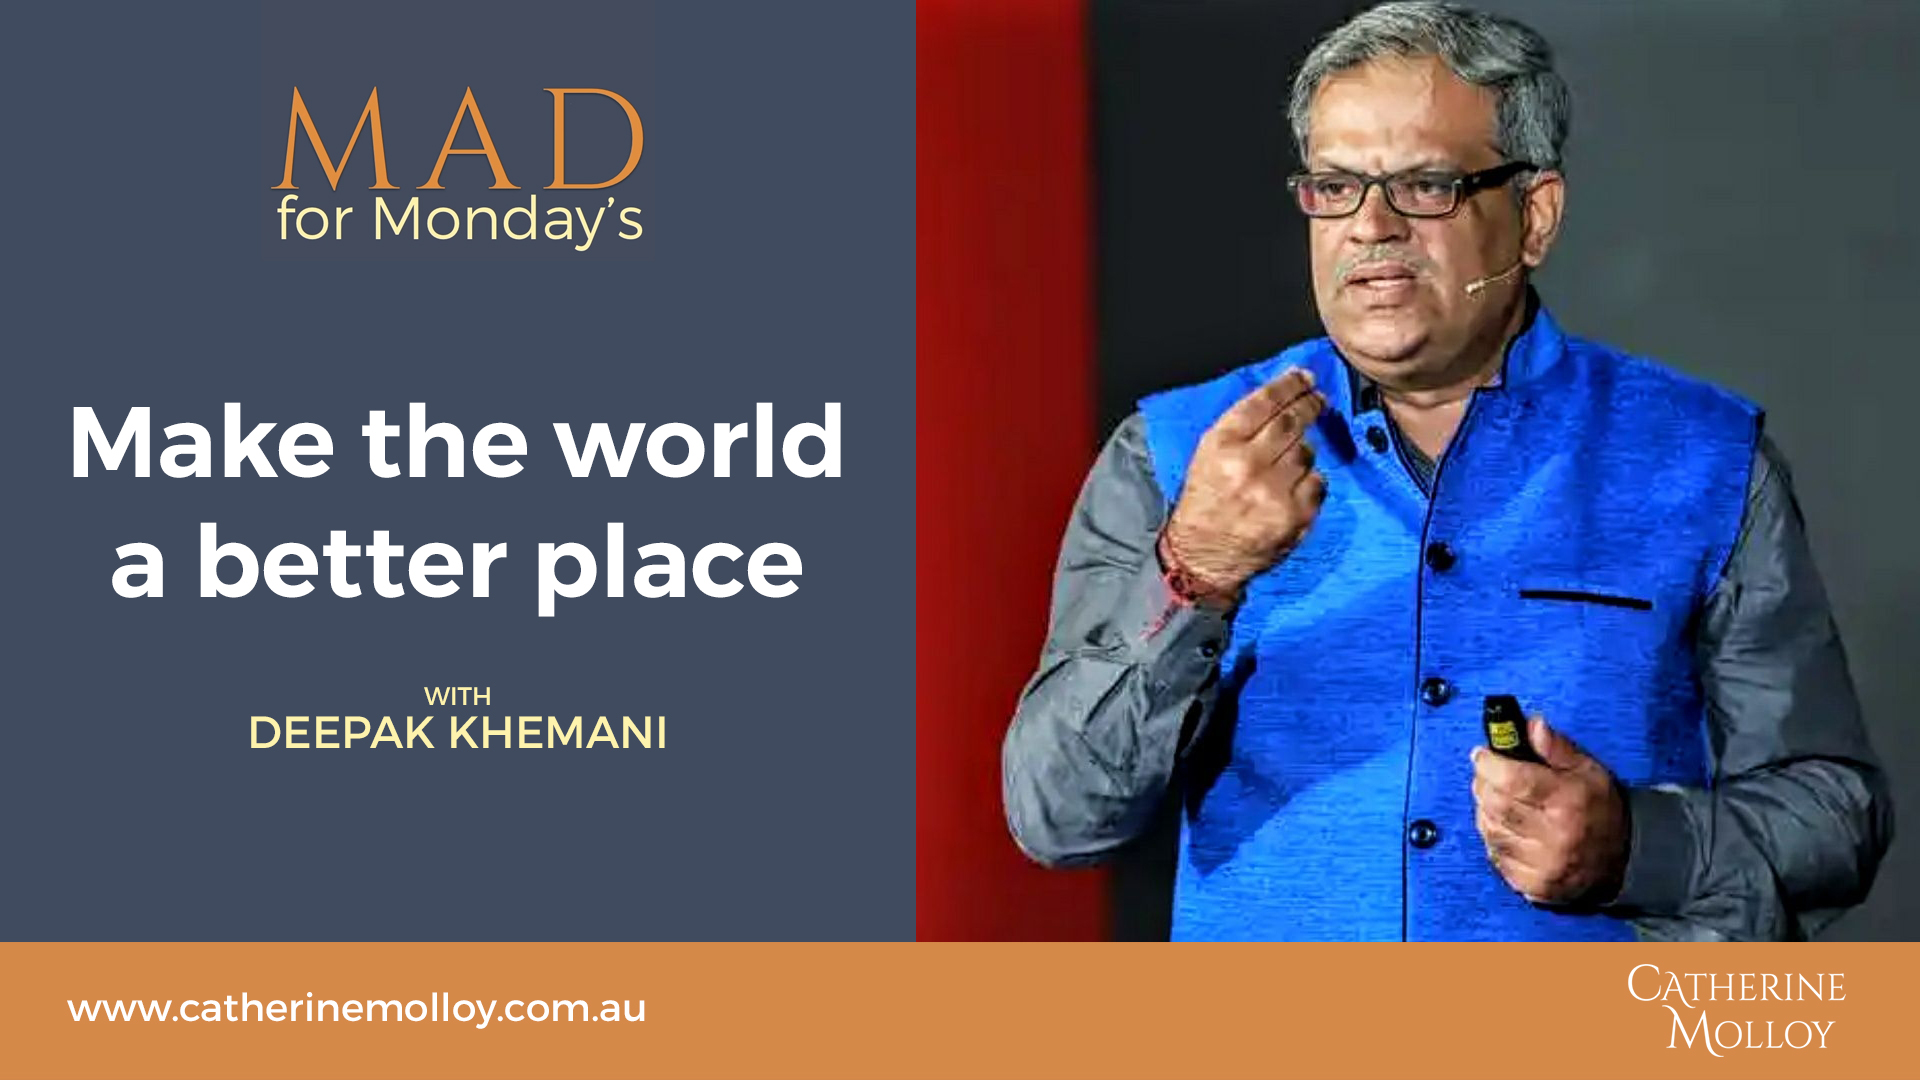 MAD for Monday’s – Make the world a better place